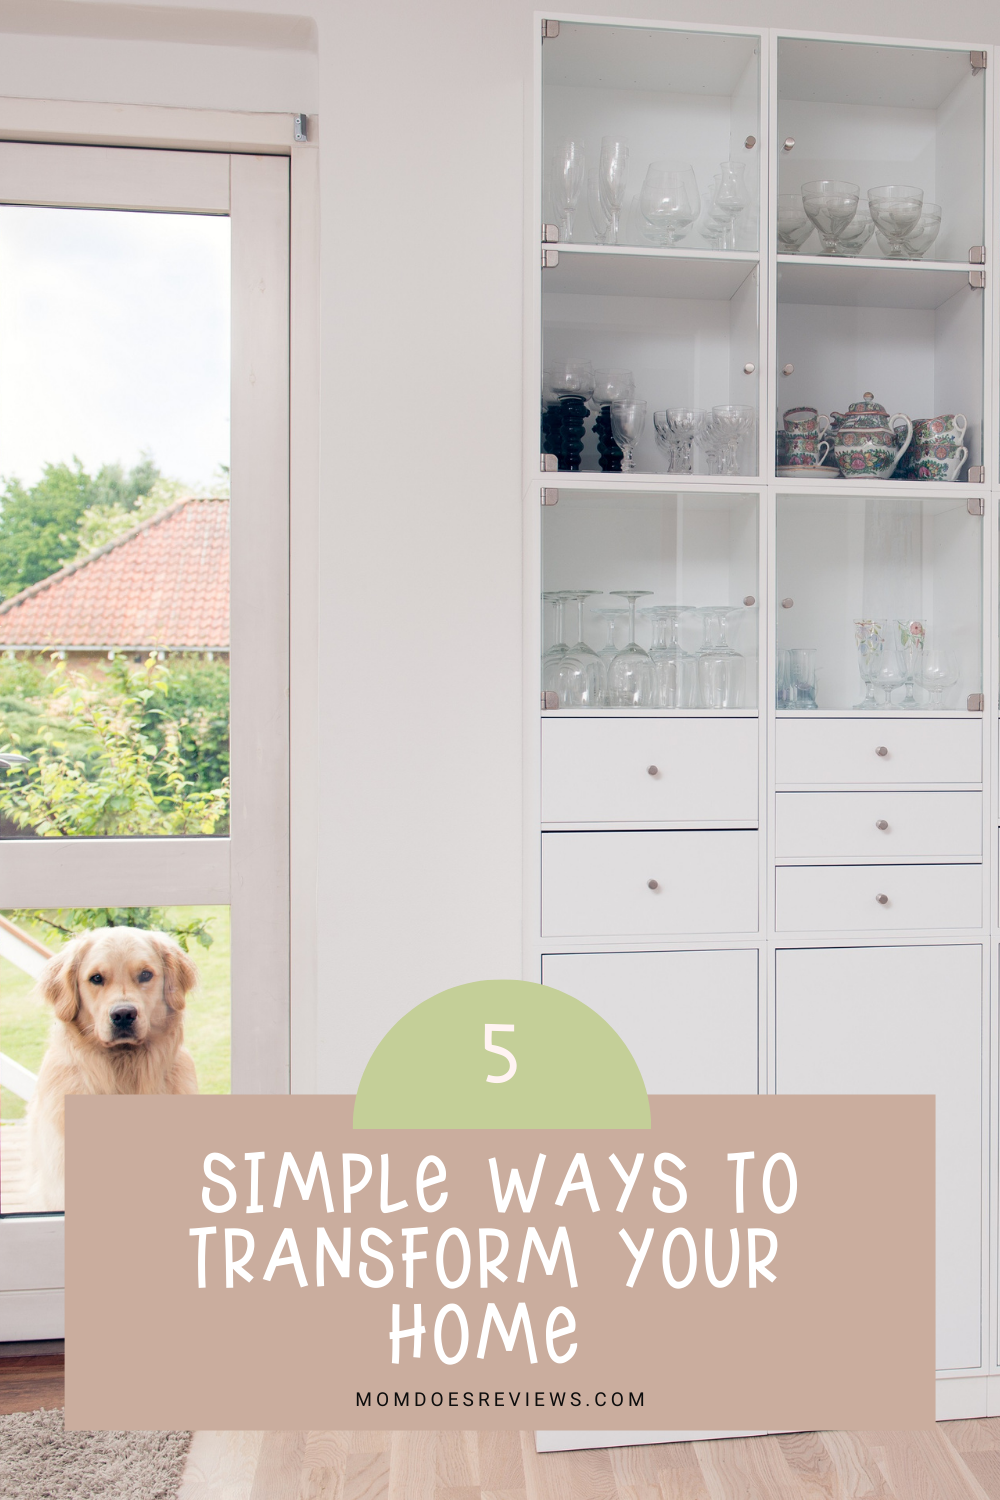 5 Simple Ways to Transform Your Home